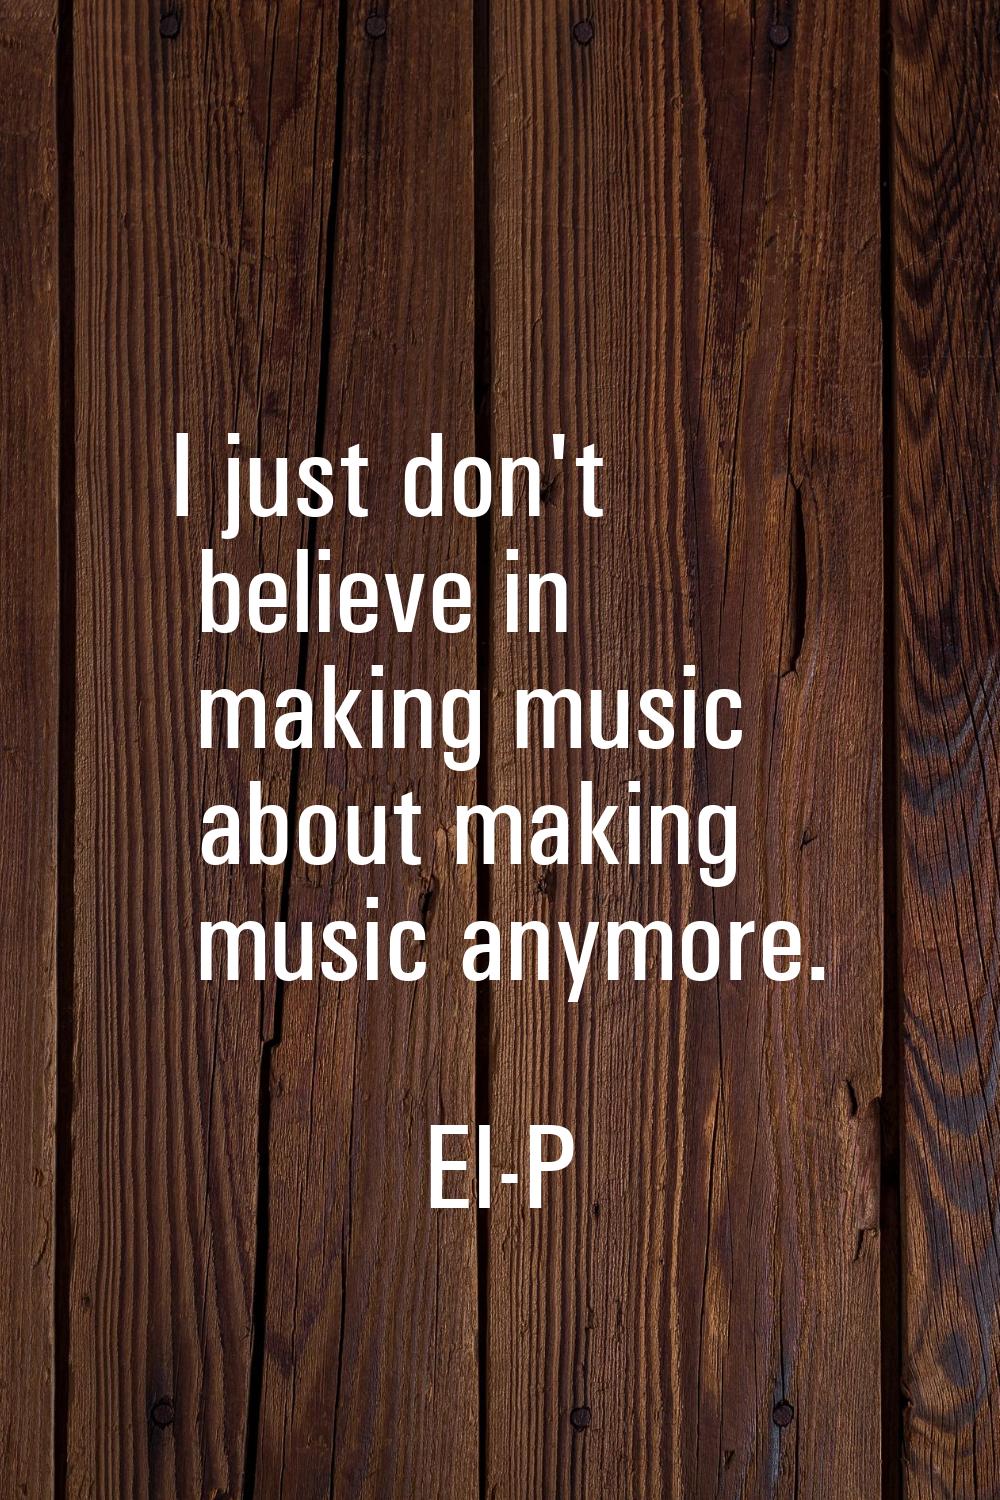 I just don't believe in making music about making music anymore.